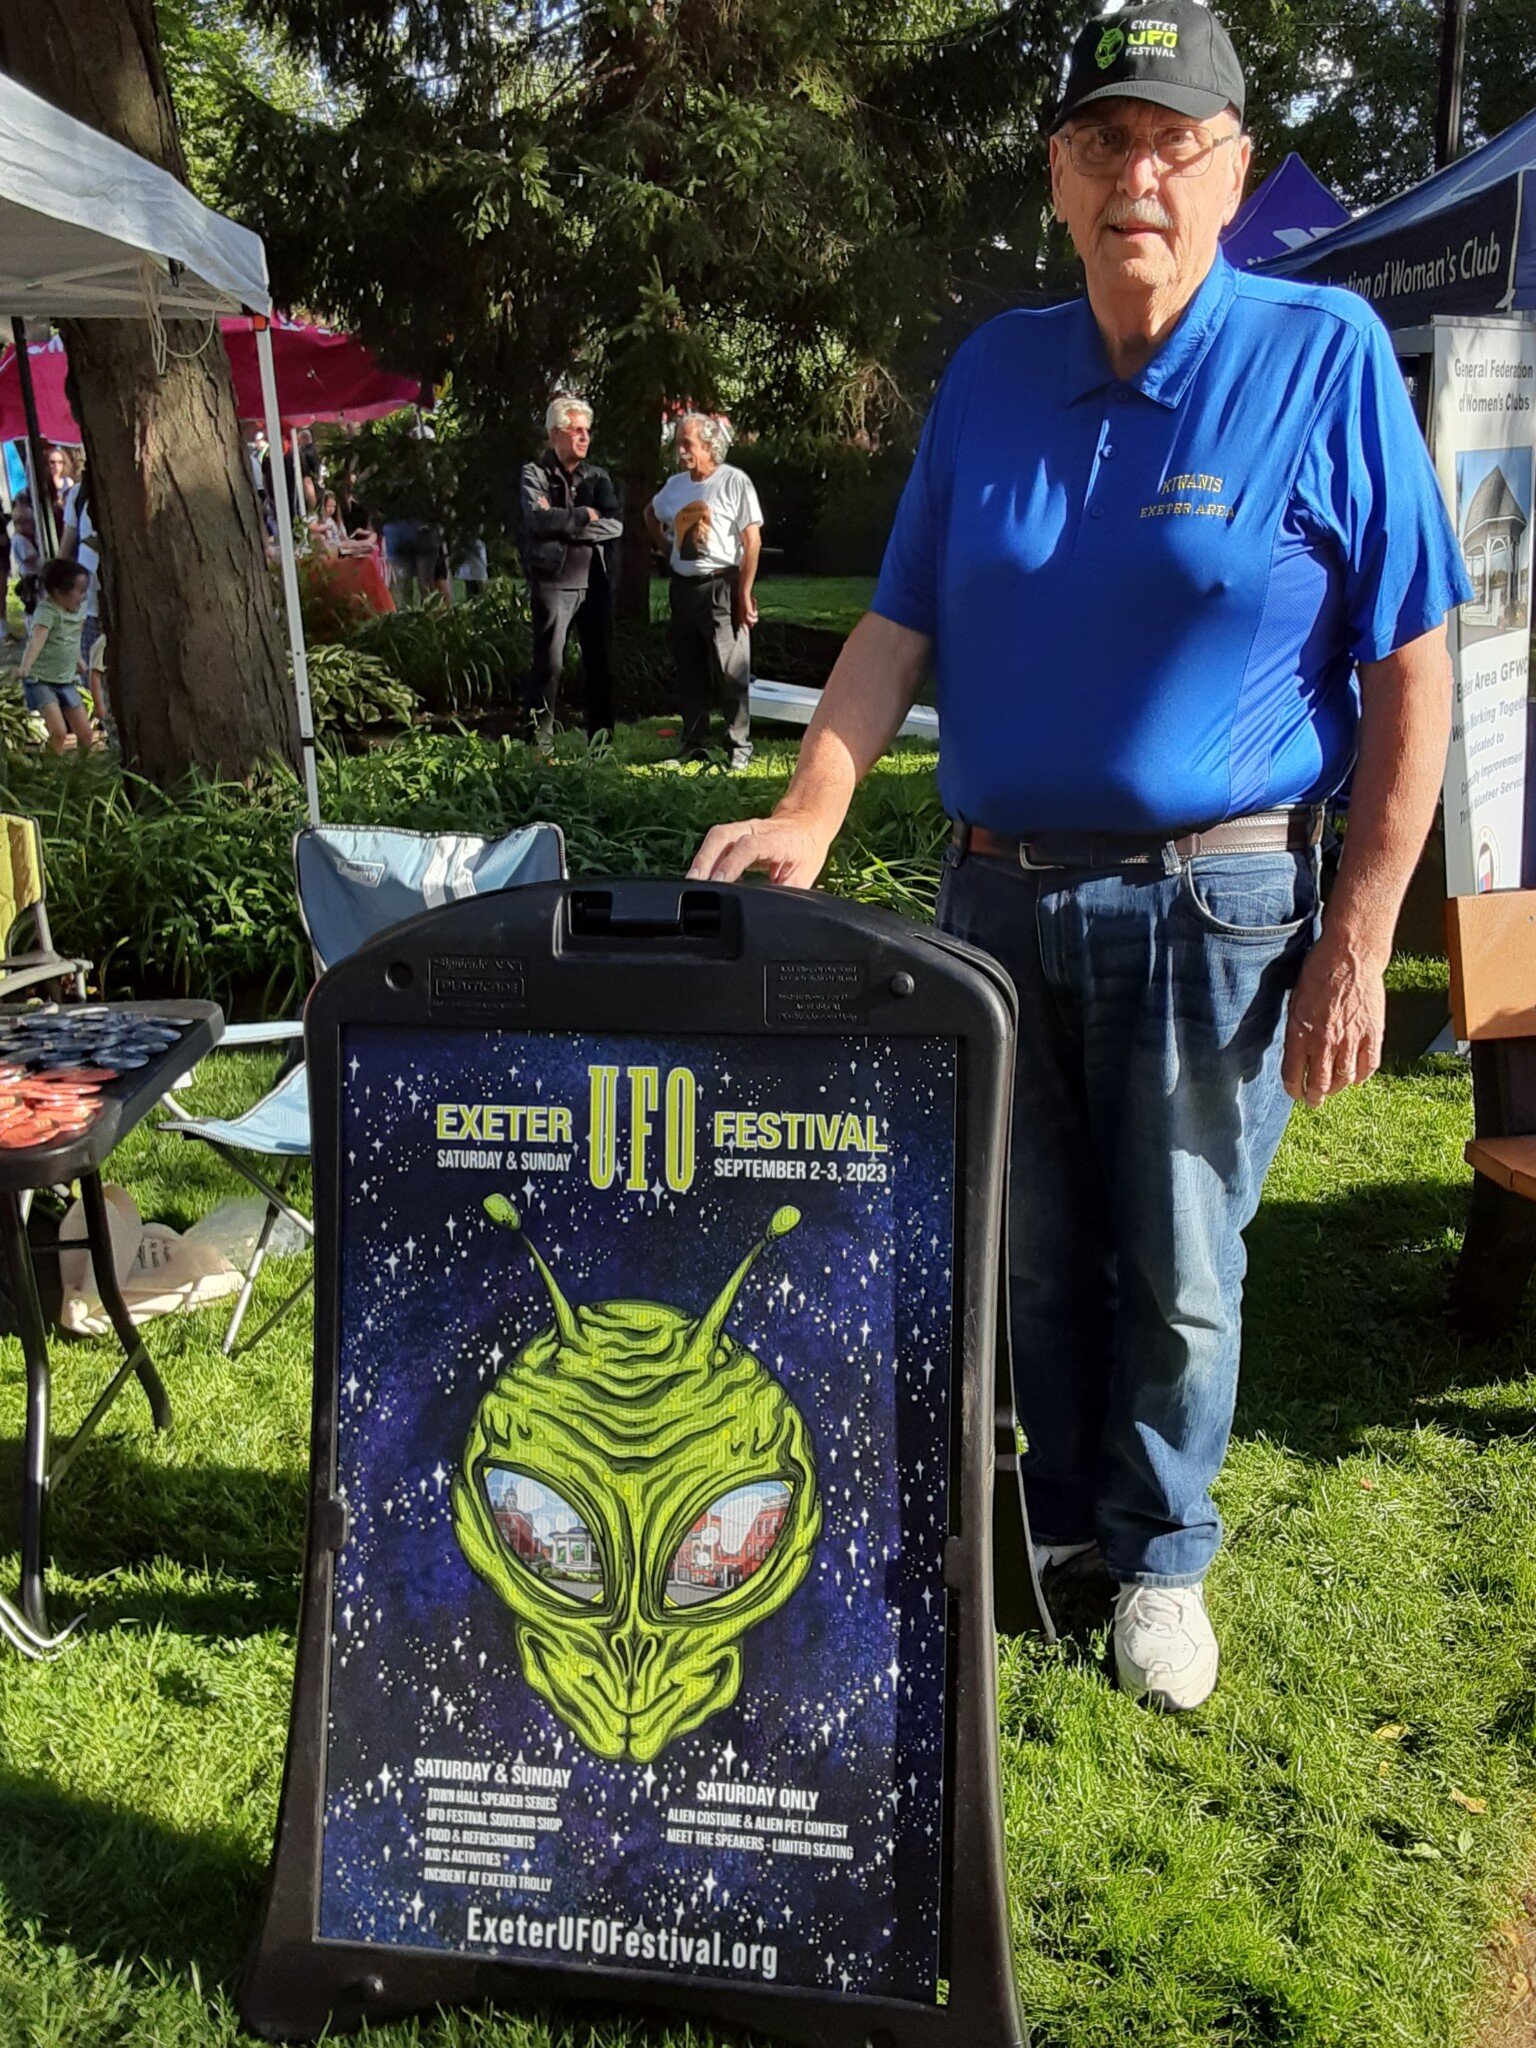 Exeter embraces its UFO Festival NH Business Review